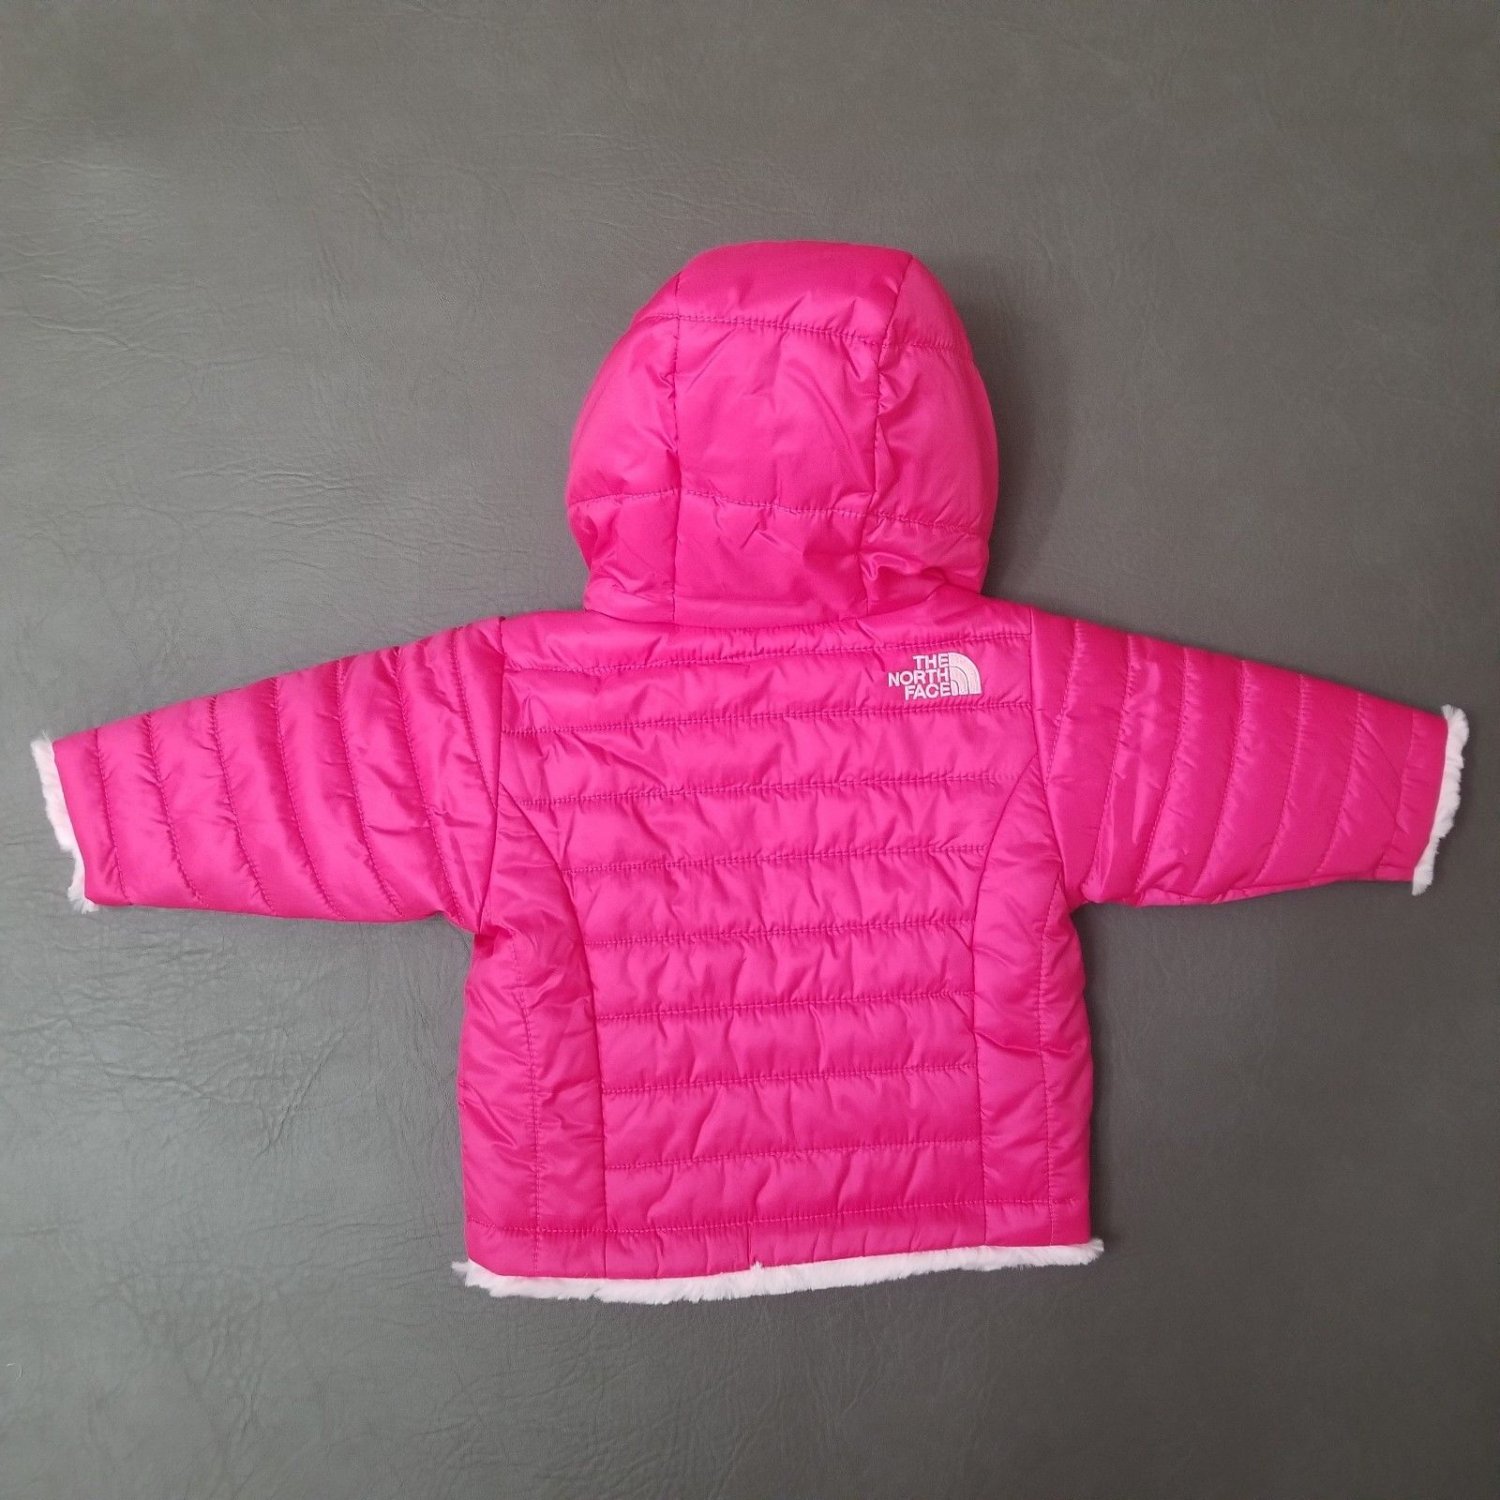 North Face Baby Infant Girls 0-3 mos Winter Puffer Coat Reversible Pink